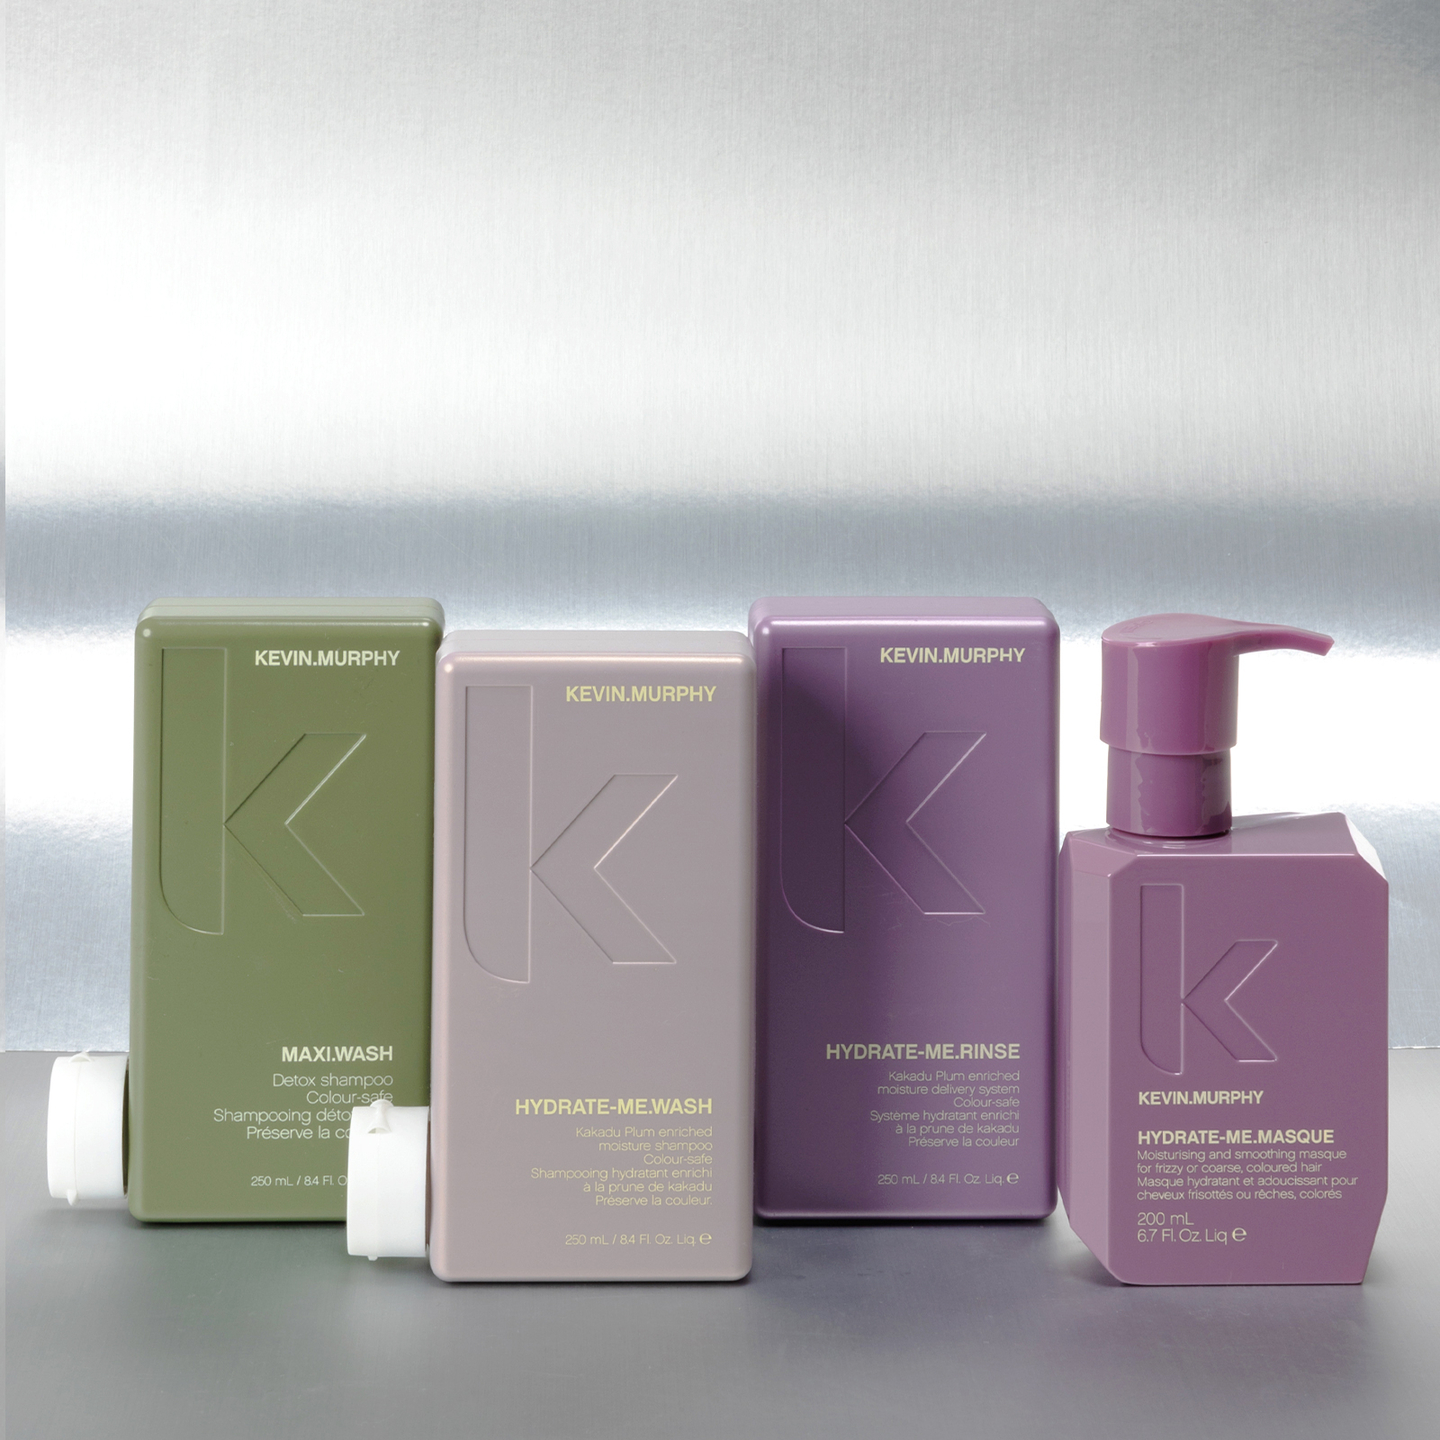 Kevin Murphy hydrating hair care set with HYDRATE-ME series for colored hair